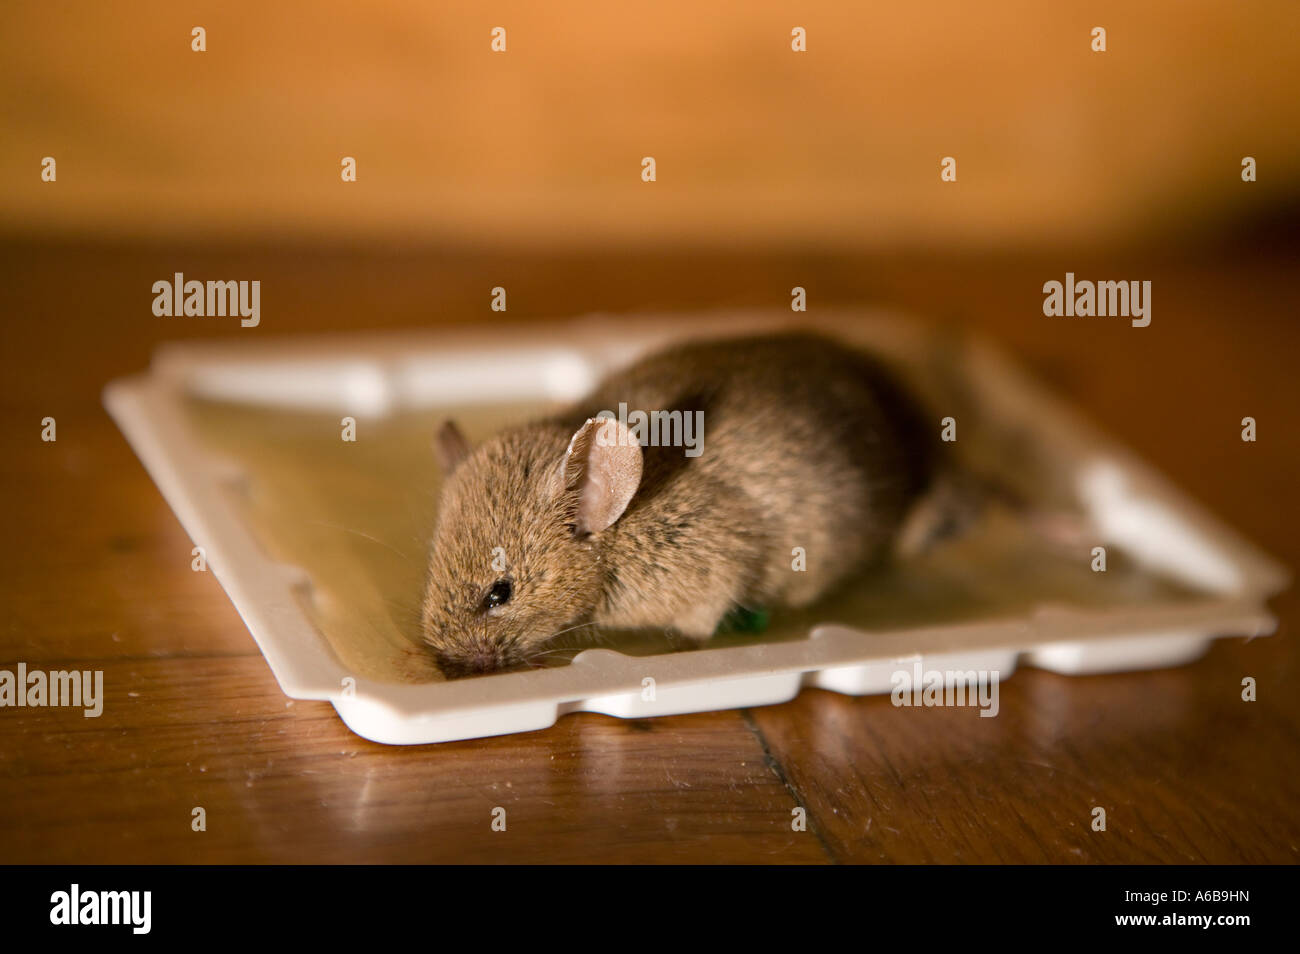 https://c8.alamy.com/comp/A6B9HN/dead-mouse-caught-in-a-sticky-glue-trap-on-a-wooden-floor-A6B9HN.jpg